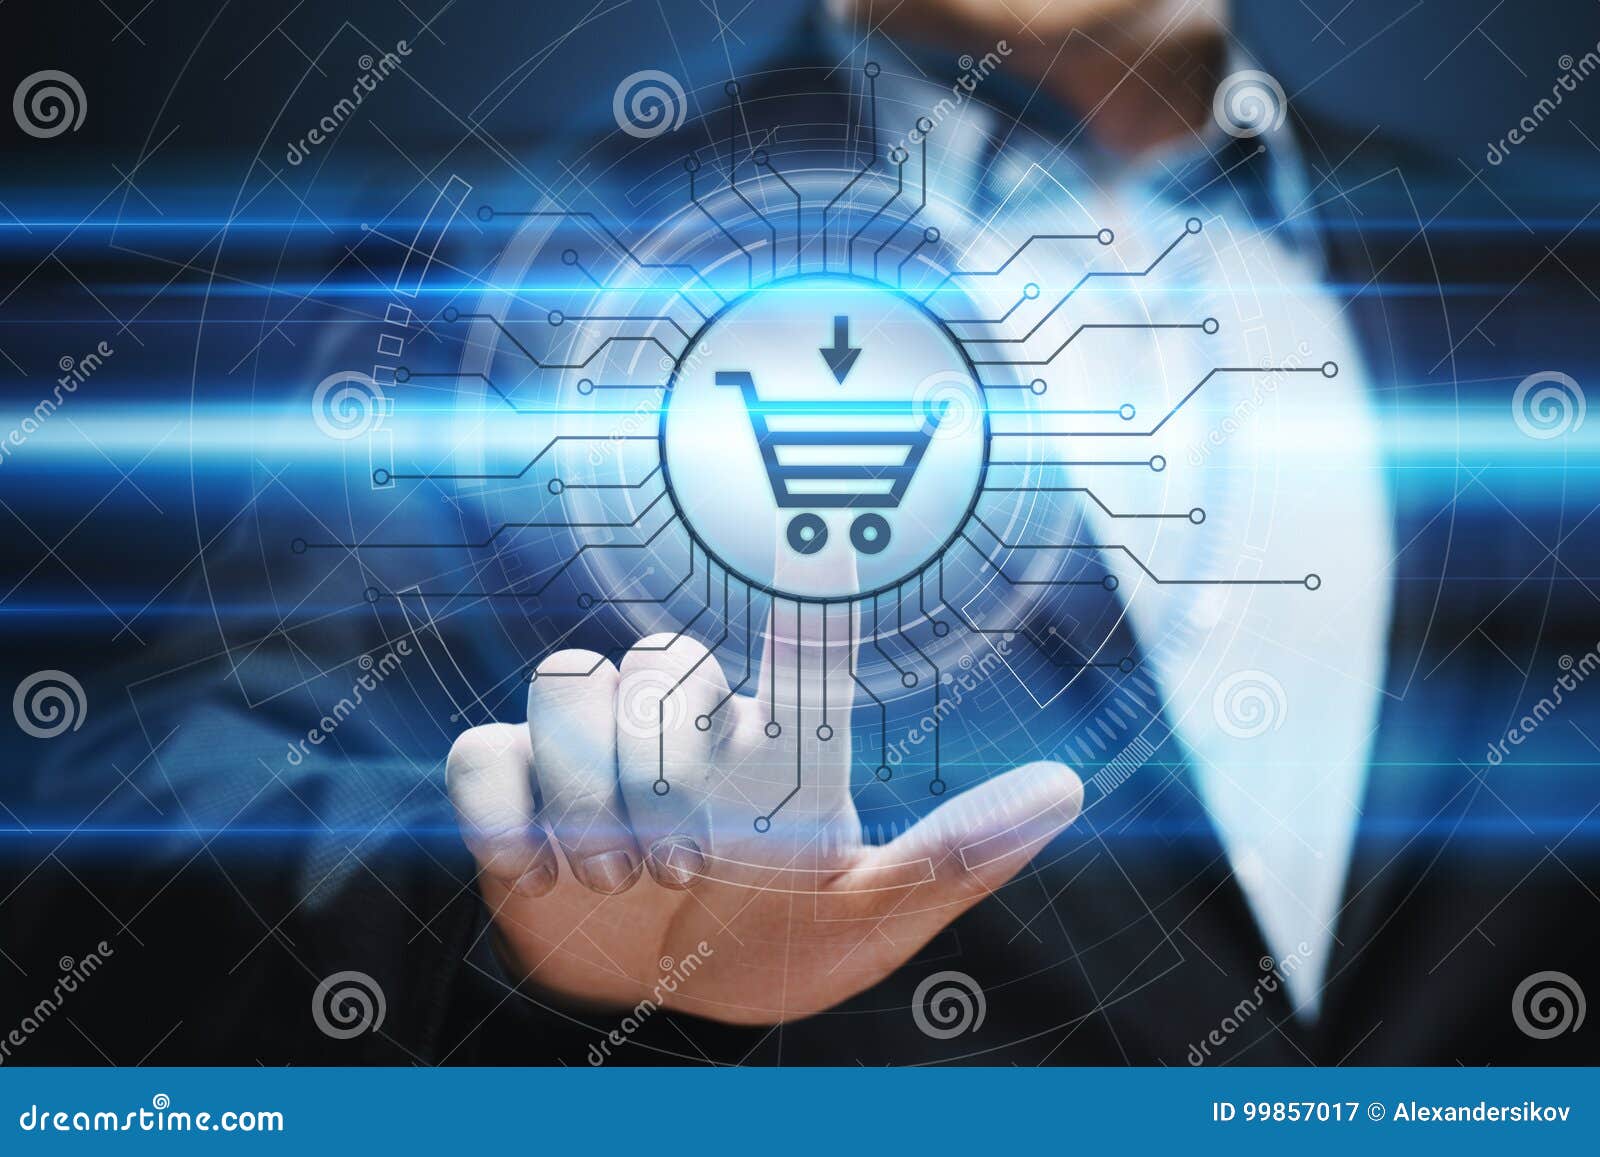 e-commerce add to cart online shopping business technology internet concept